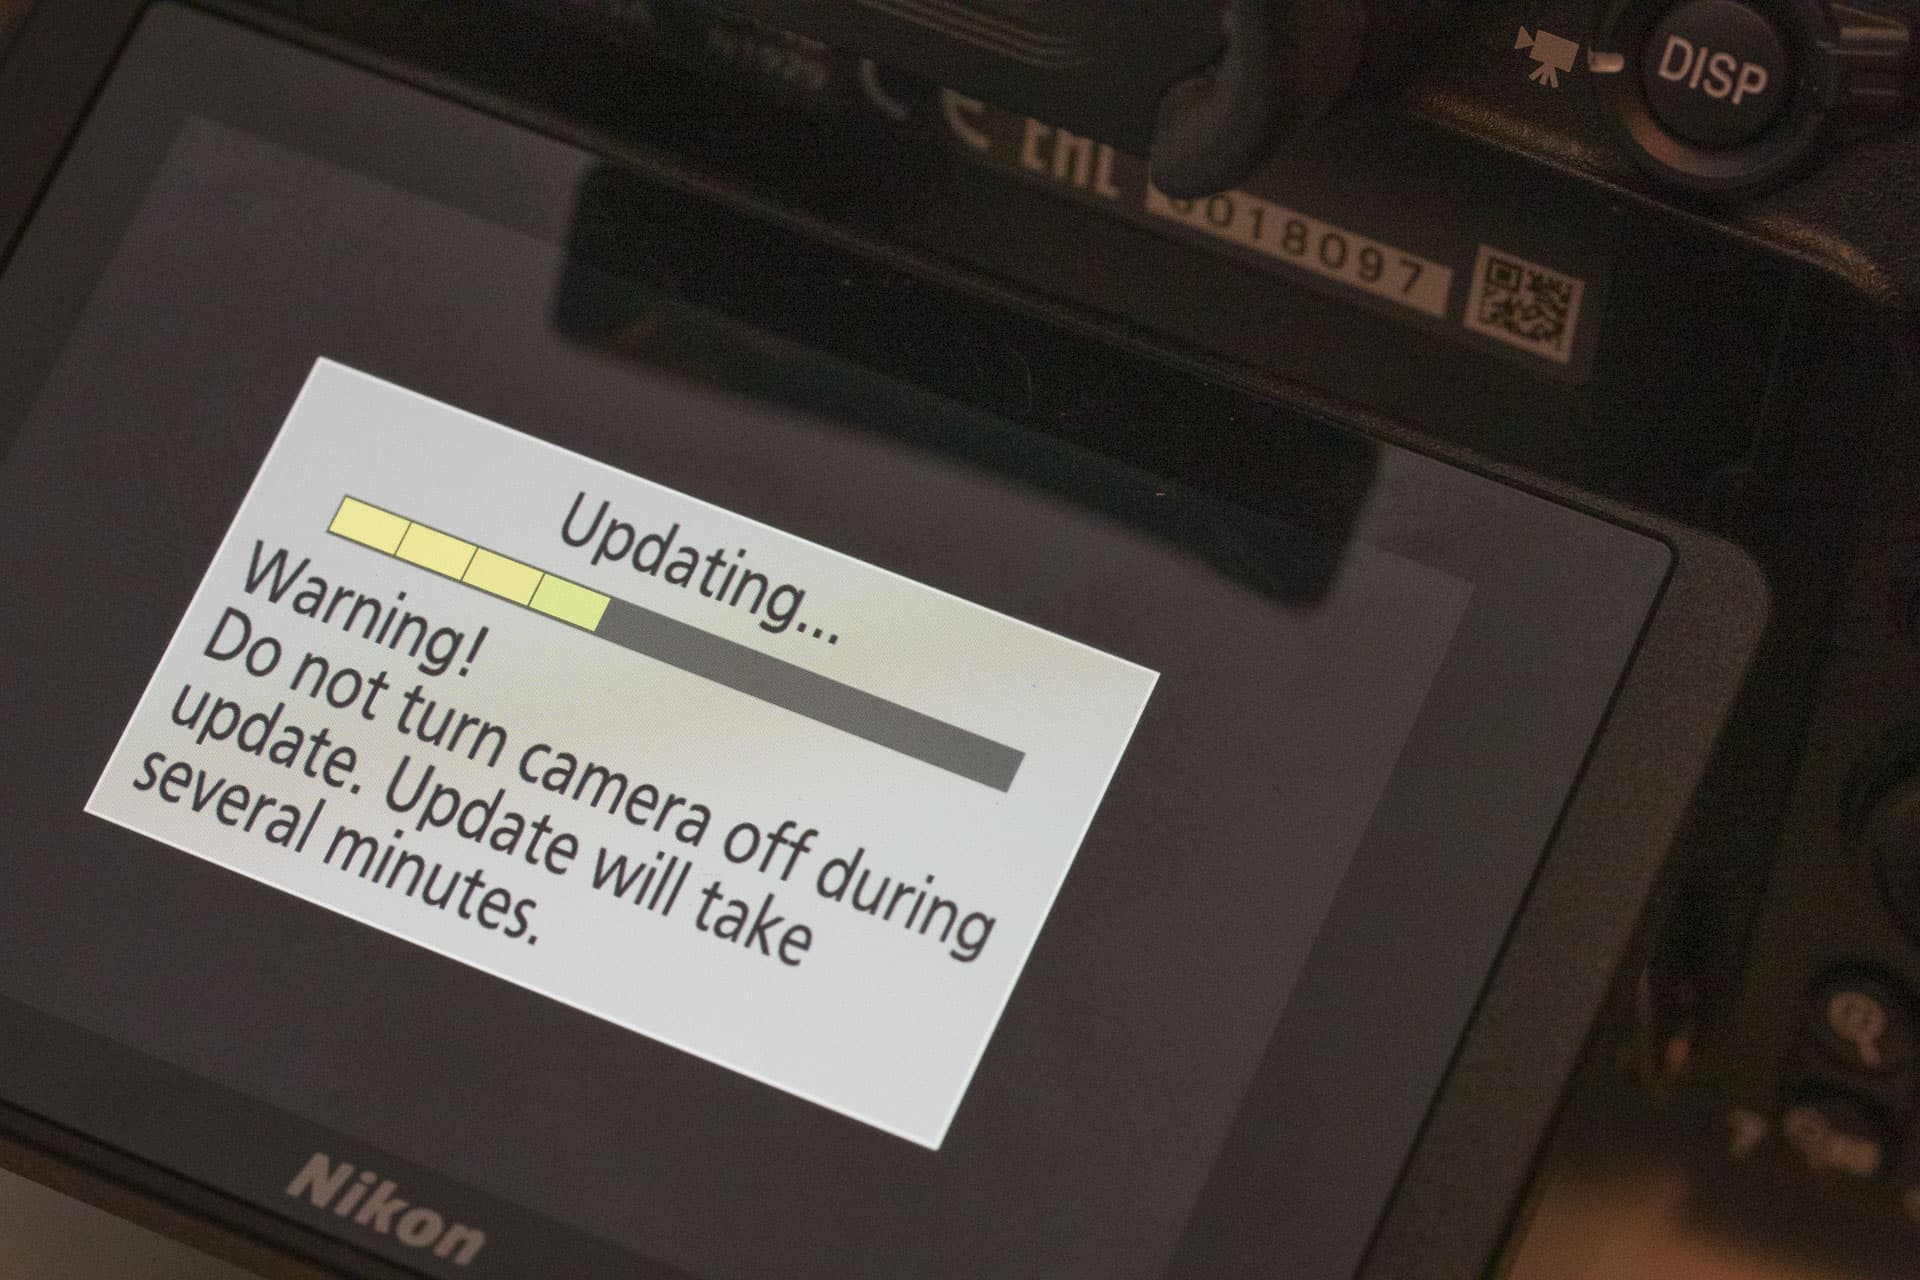 Nikon firmware update, warning screen, make sure you do not turn your camera off during the update.